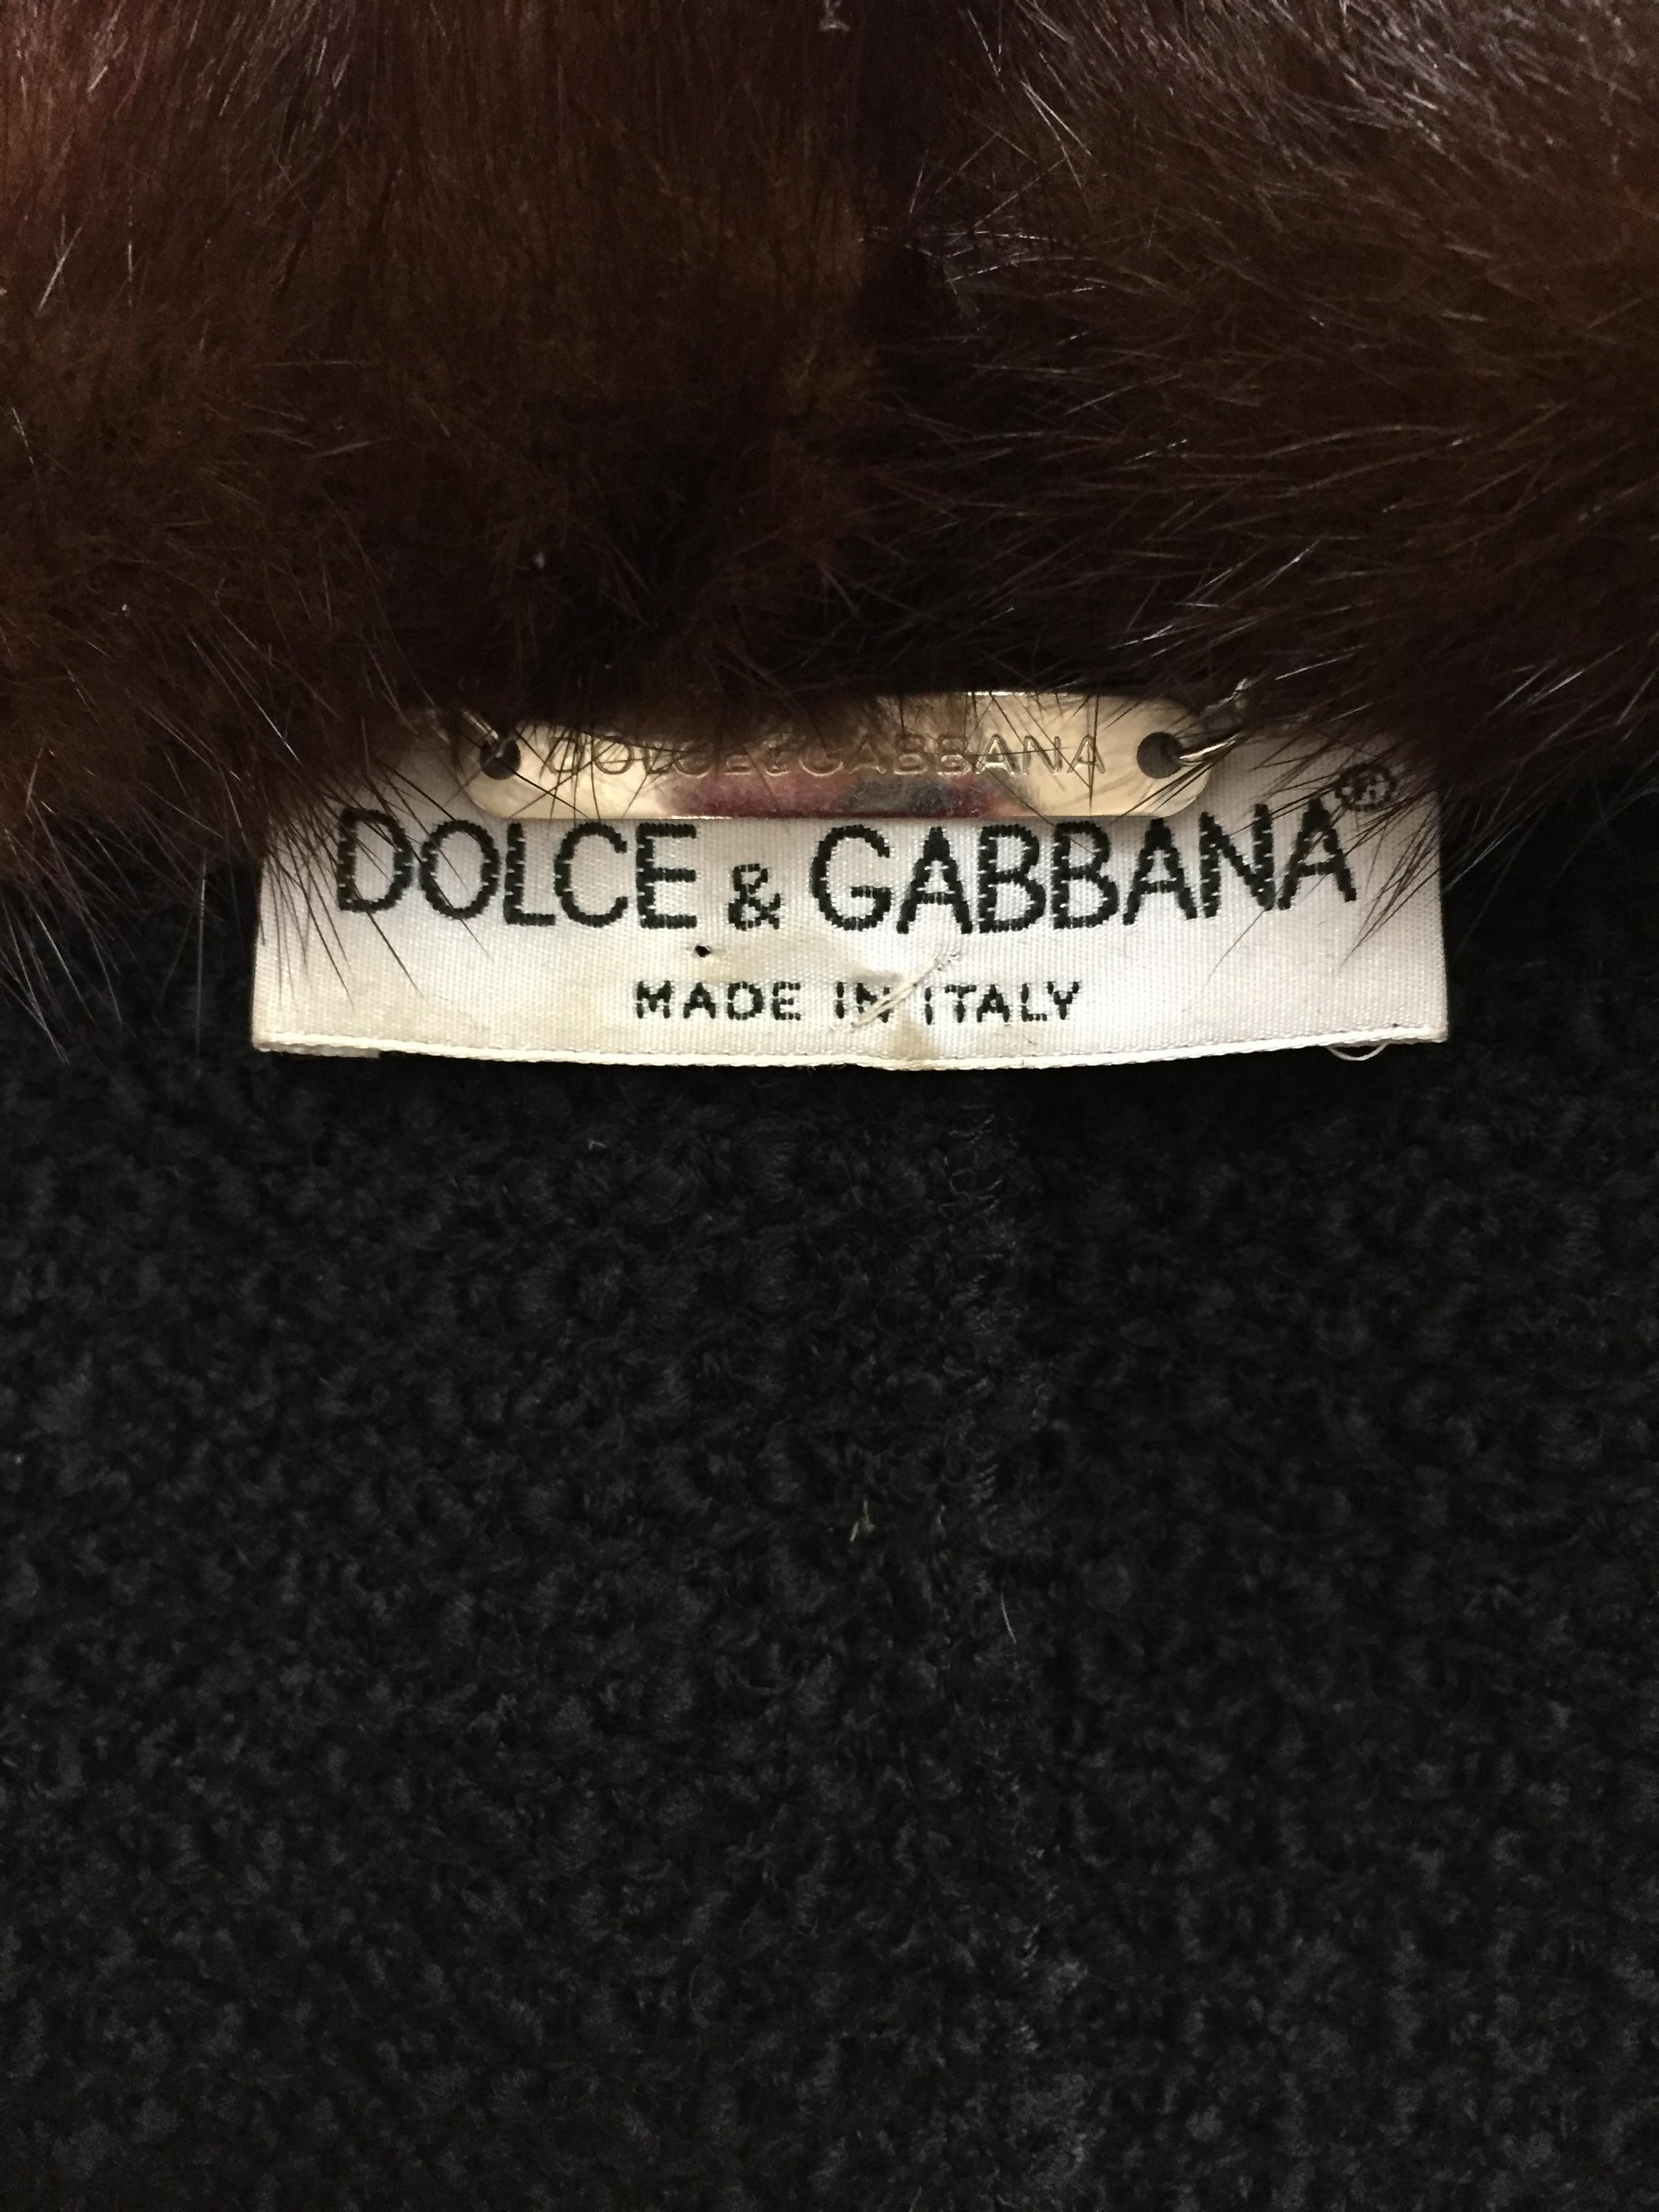 S/S 1997 Dolce and Gabbana Pin-Up Black Knit Jacket and Skirt Set w ...